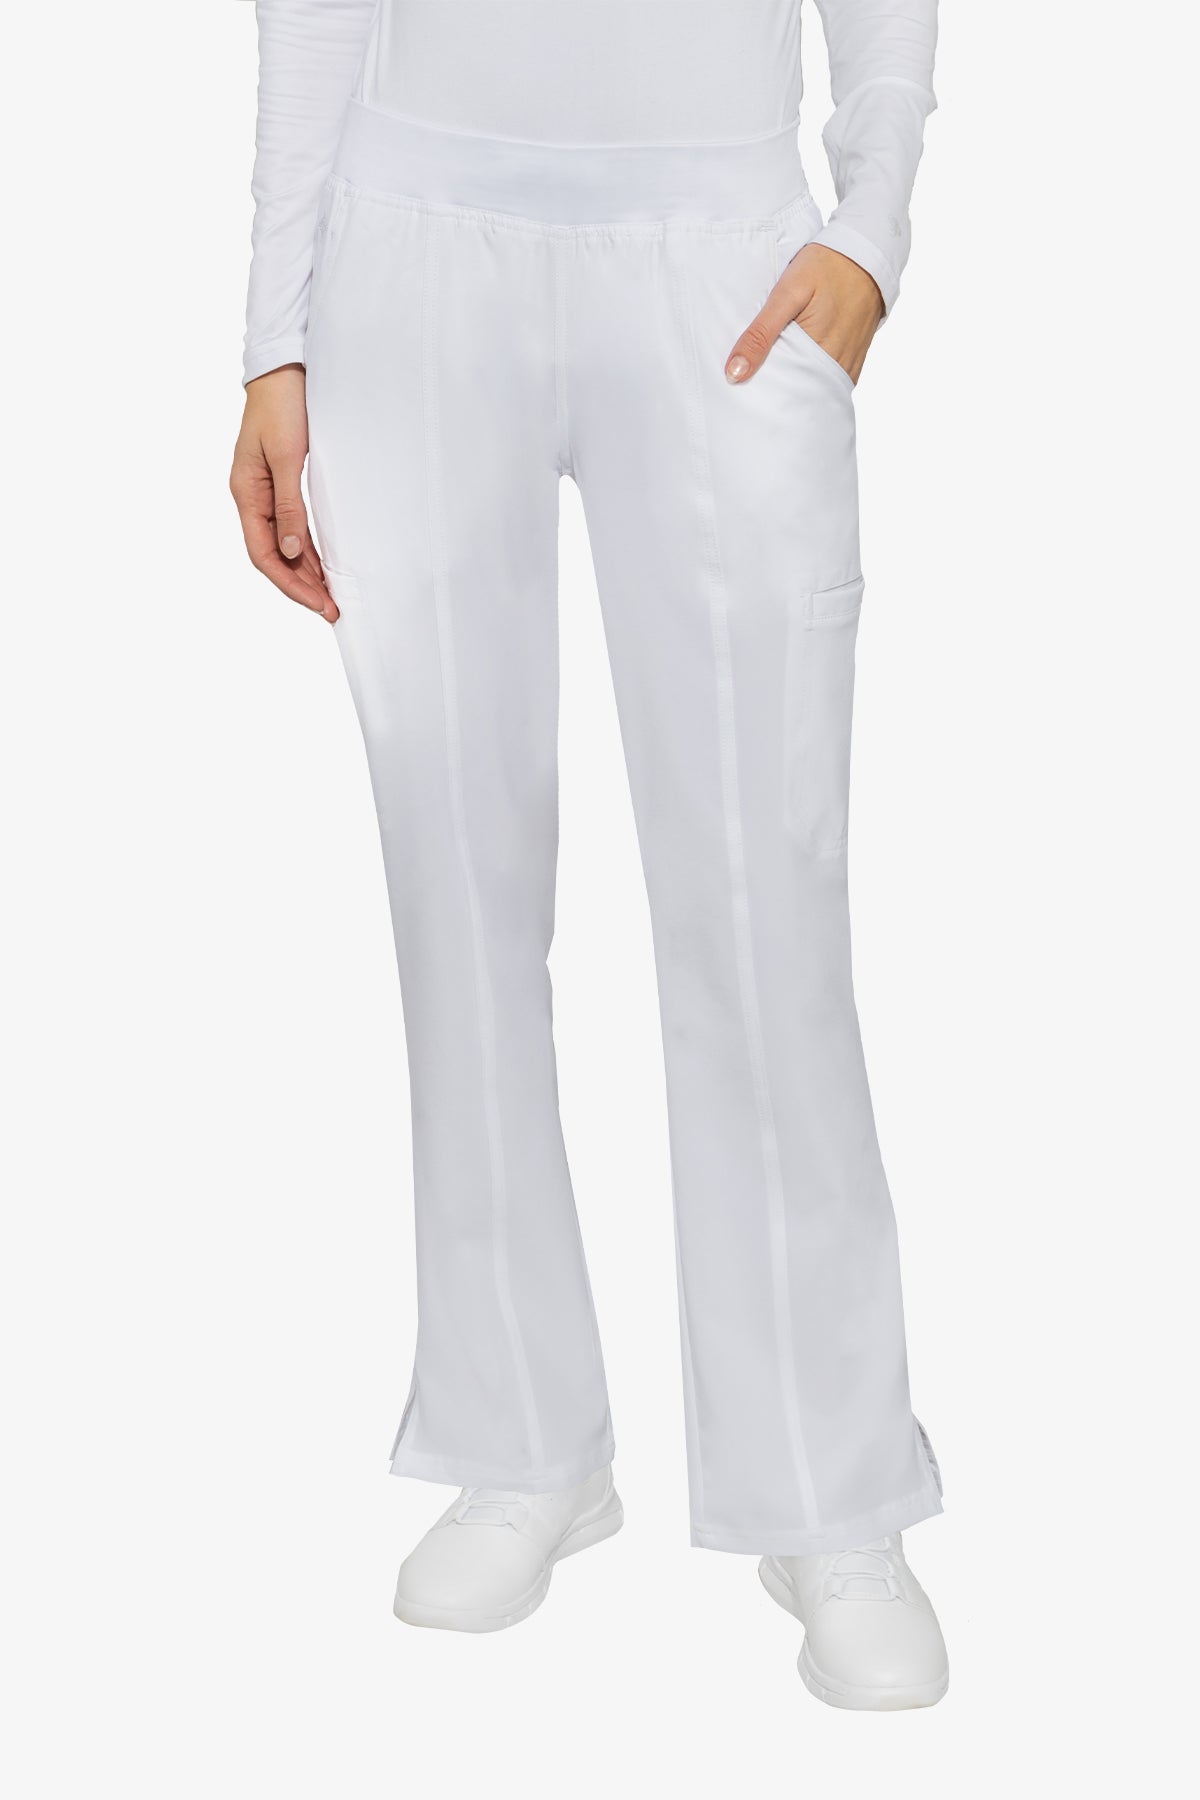 8744 - Med Couture - ENERGY -  YOGA 2 CARGO POCKET PANT (SIZE:XS/T-2X/T)